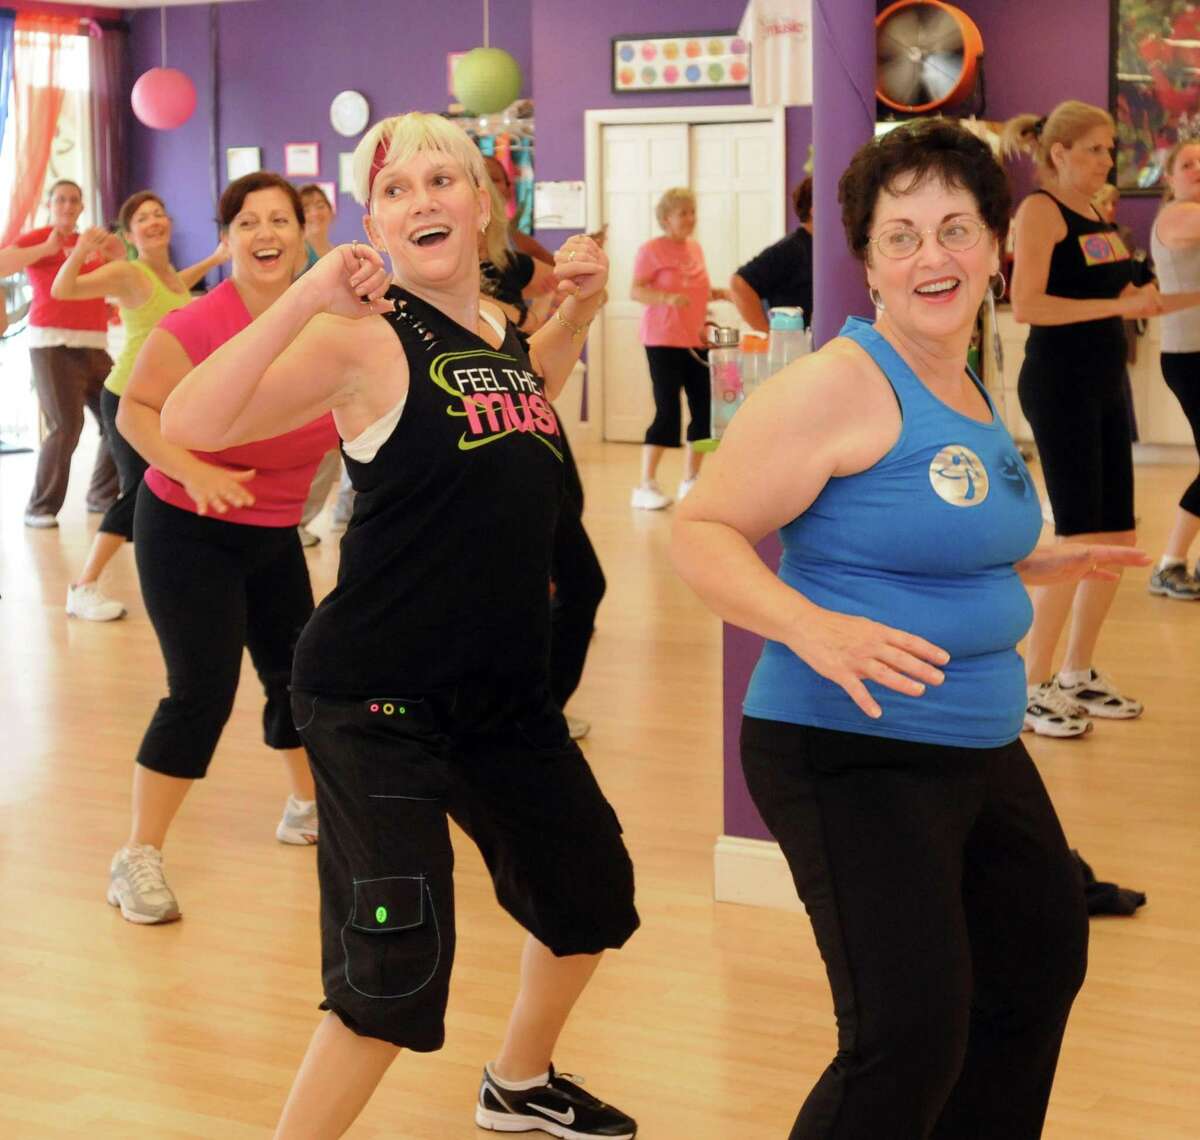 Zumba will be offered as part of the New You Series on Jan. 12 at the Ridgefield Playhouse.